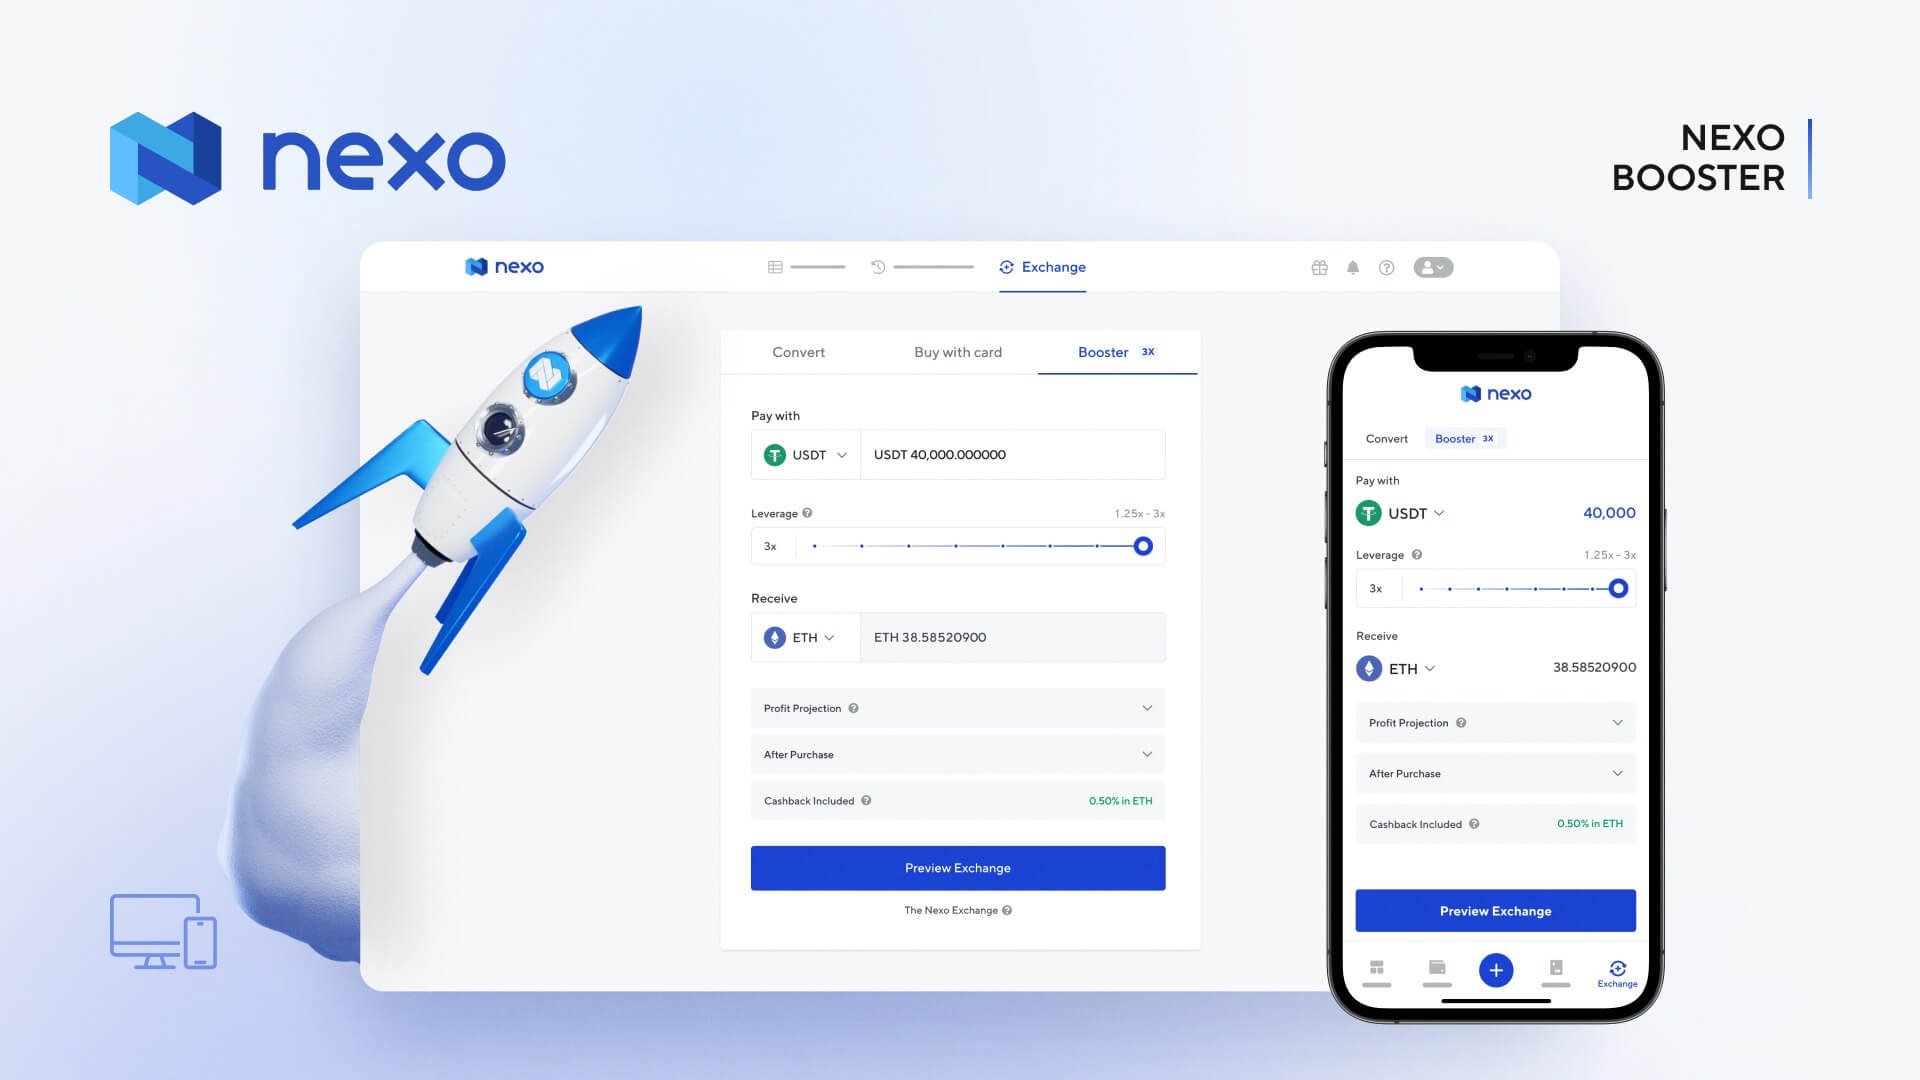 The Nexo Booster Is Now Available on Our Web Platform